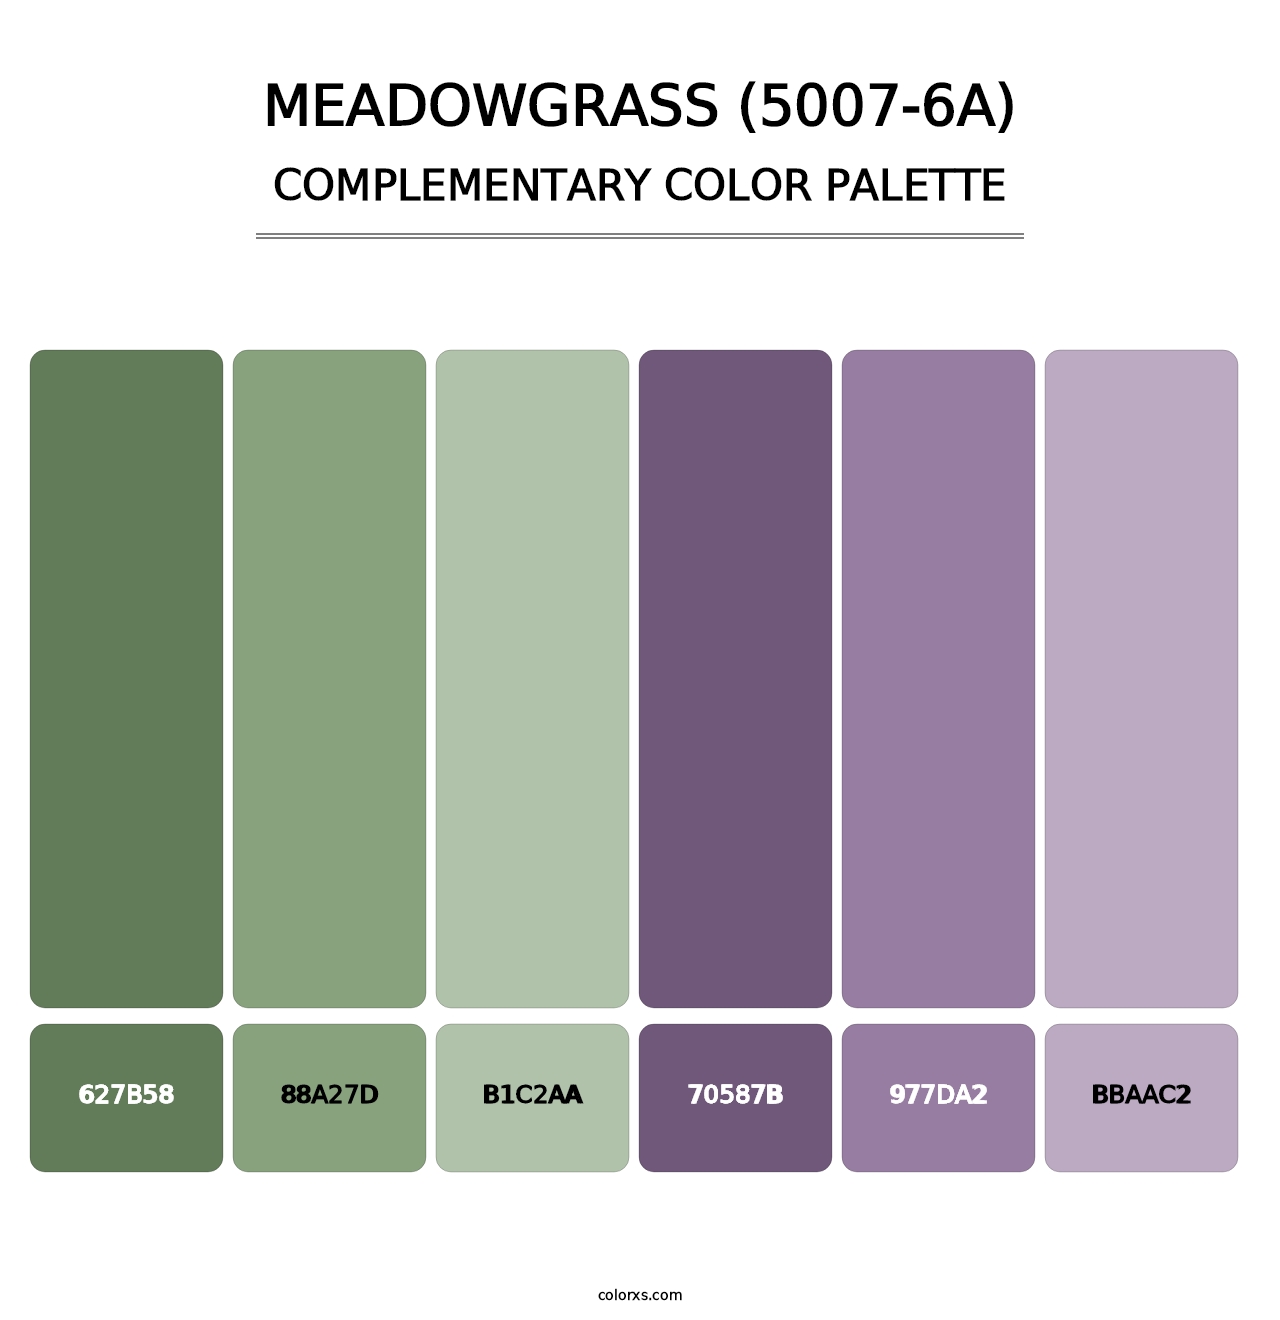 Meadowgrass (5007-6A) - Complementary Color Palette